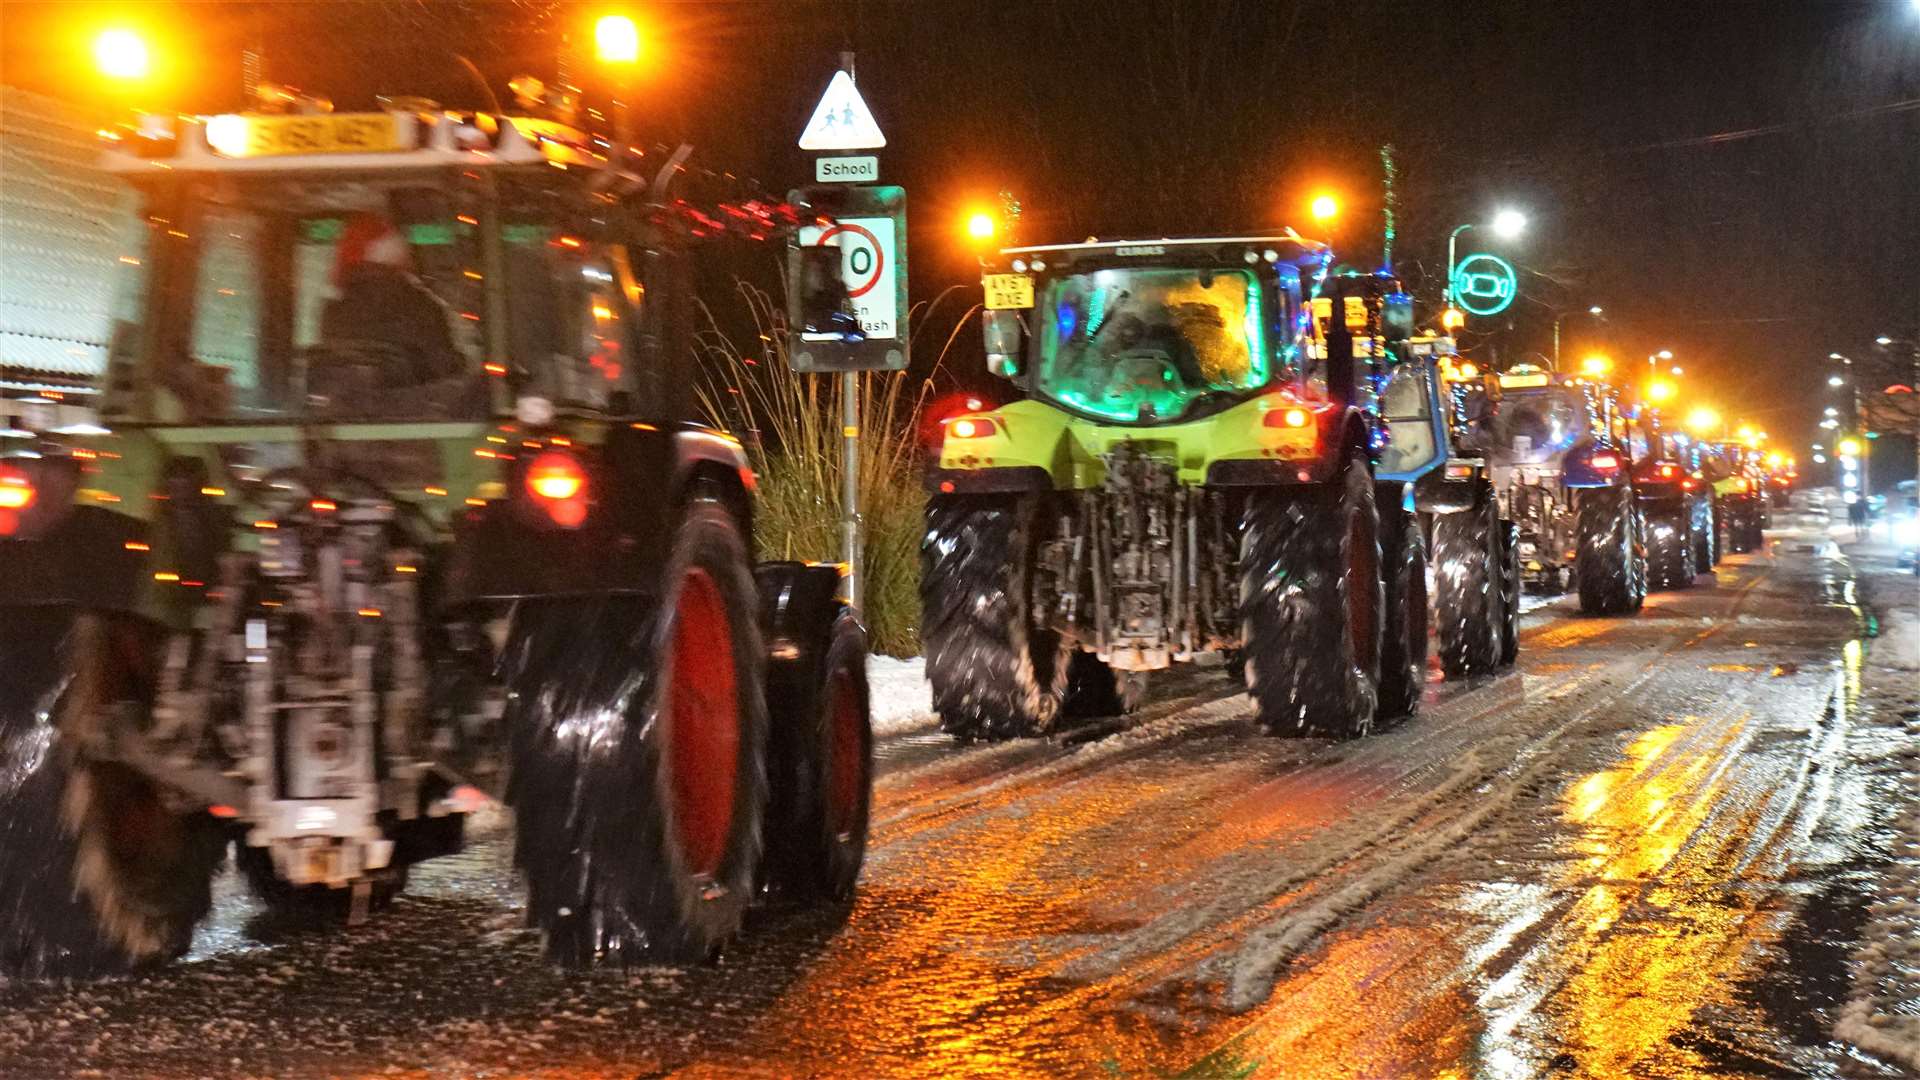 Young Farmers centenary tractor run travels through Watten on its way to Thurso from Bower. Picture: DGS